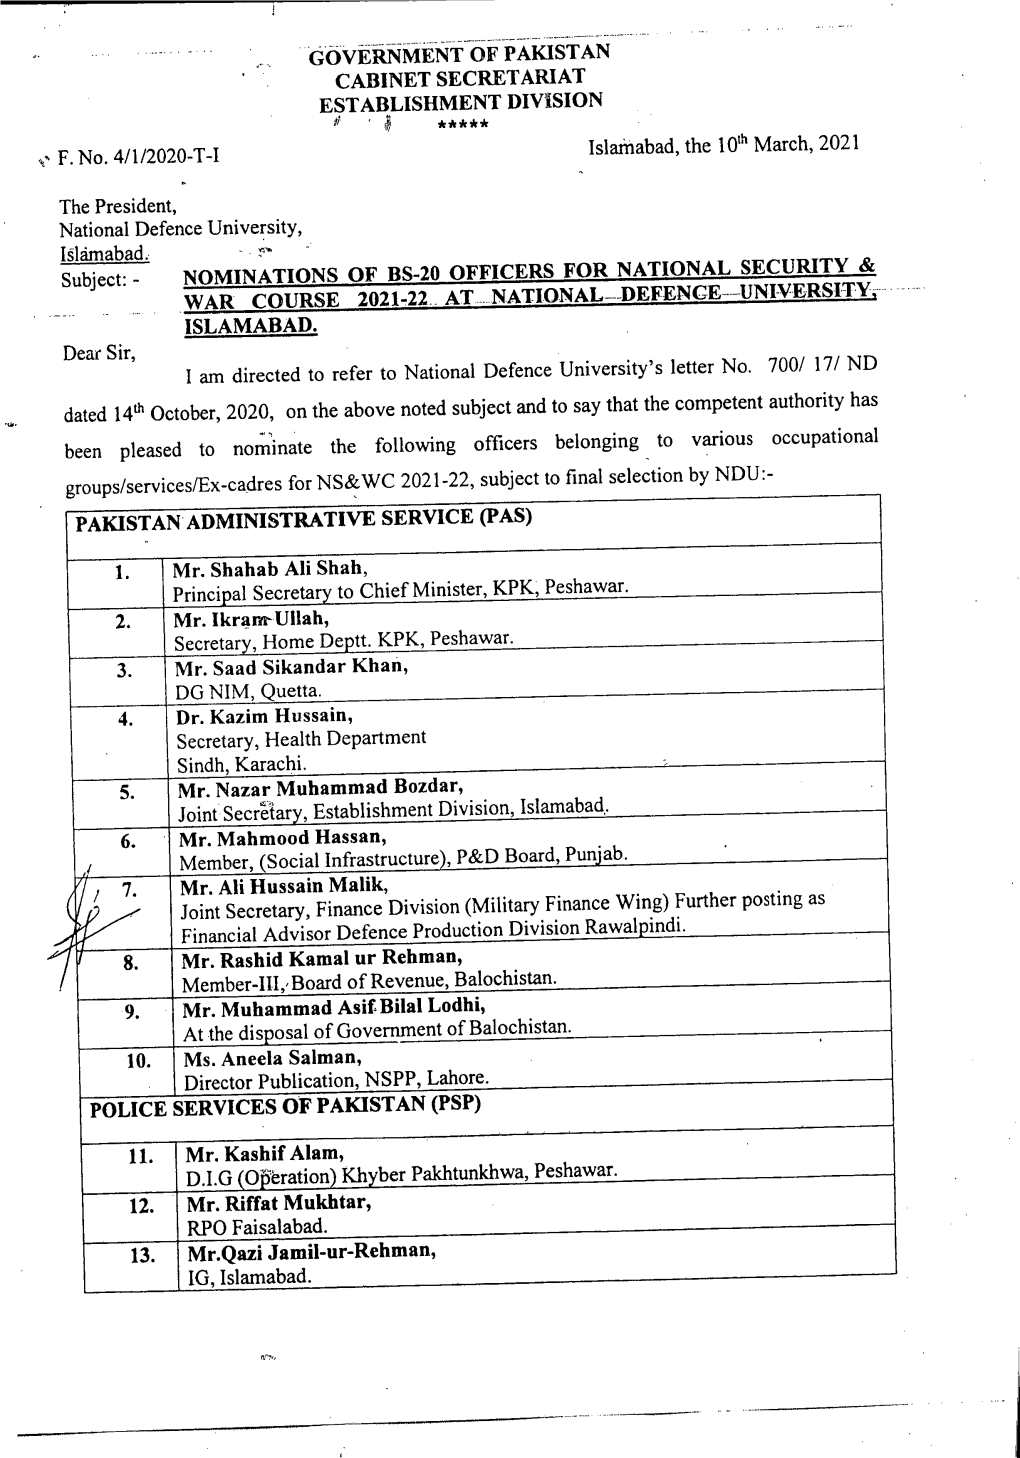 Nominations of Bs-20 Officers for National Security & War Course 2021-22 at National—Defence—University, Islamabad